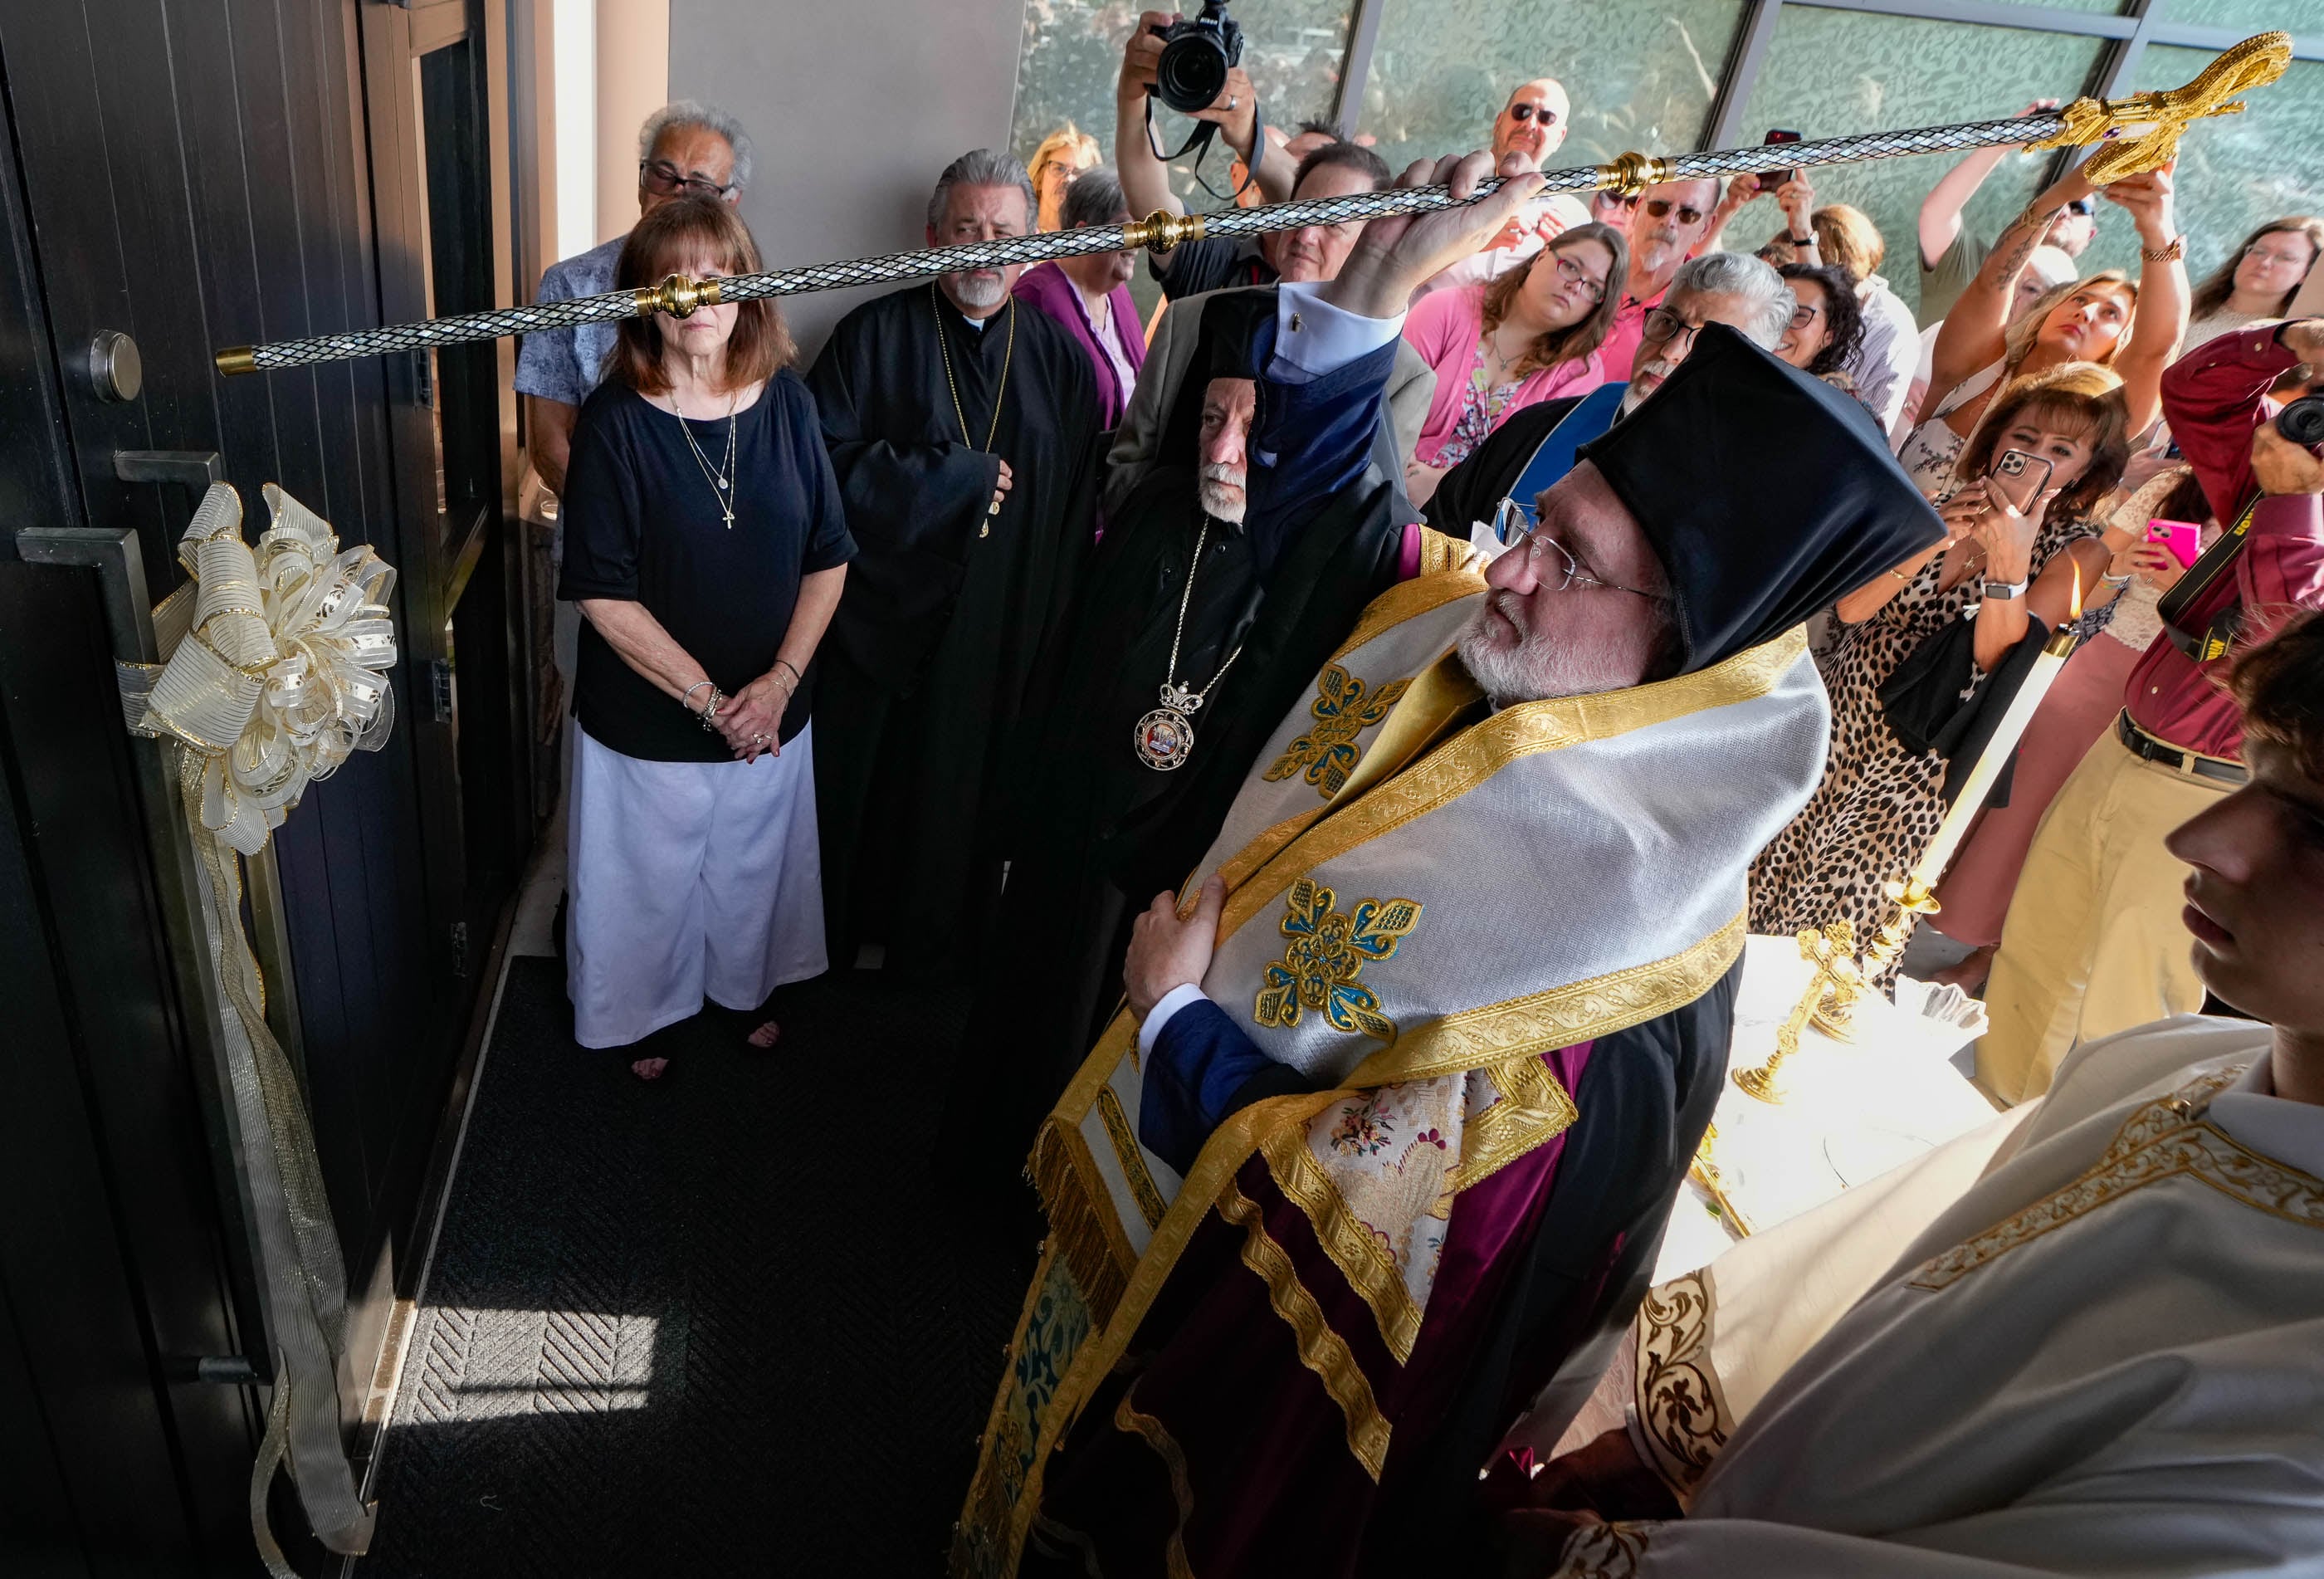 (Francisco Kjolseth | The Salt Lake Tribune) Archbishop Elpidophoros of America uses his staff to kock for the opening of the doors for the newly transformed St. Anna Greek Orthodox Church in Sandy on Saturday, July 13, 2024. The new church was transformed from a garden center into a sacred sanctuary.